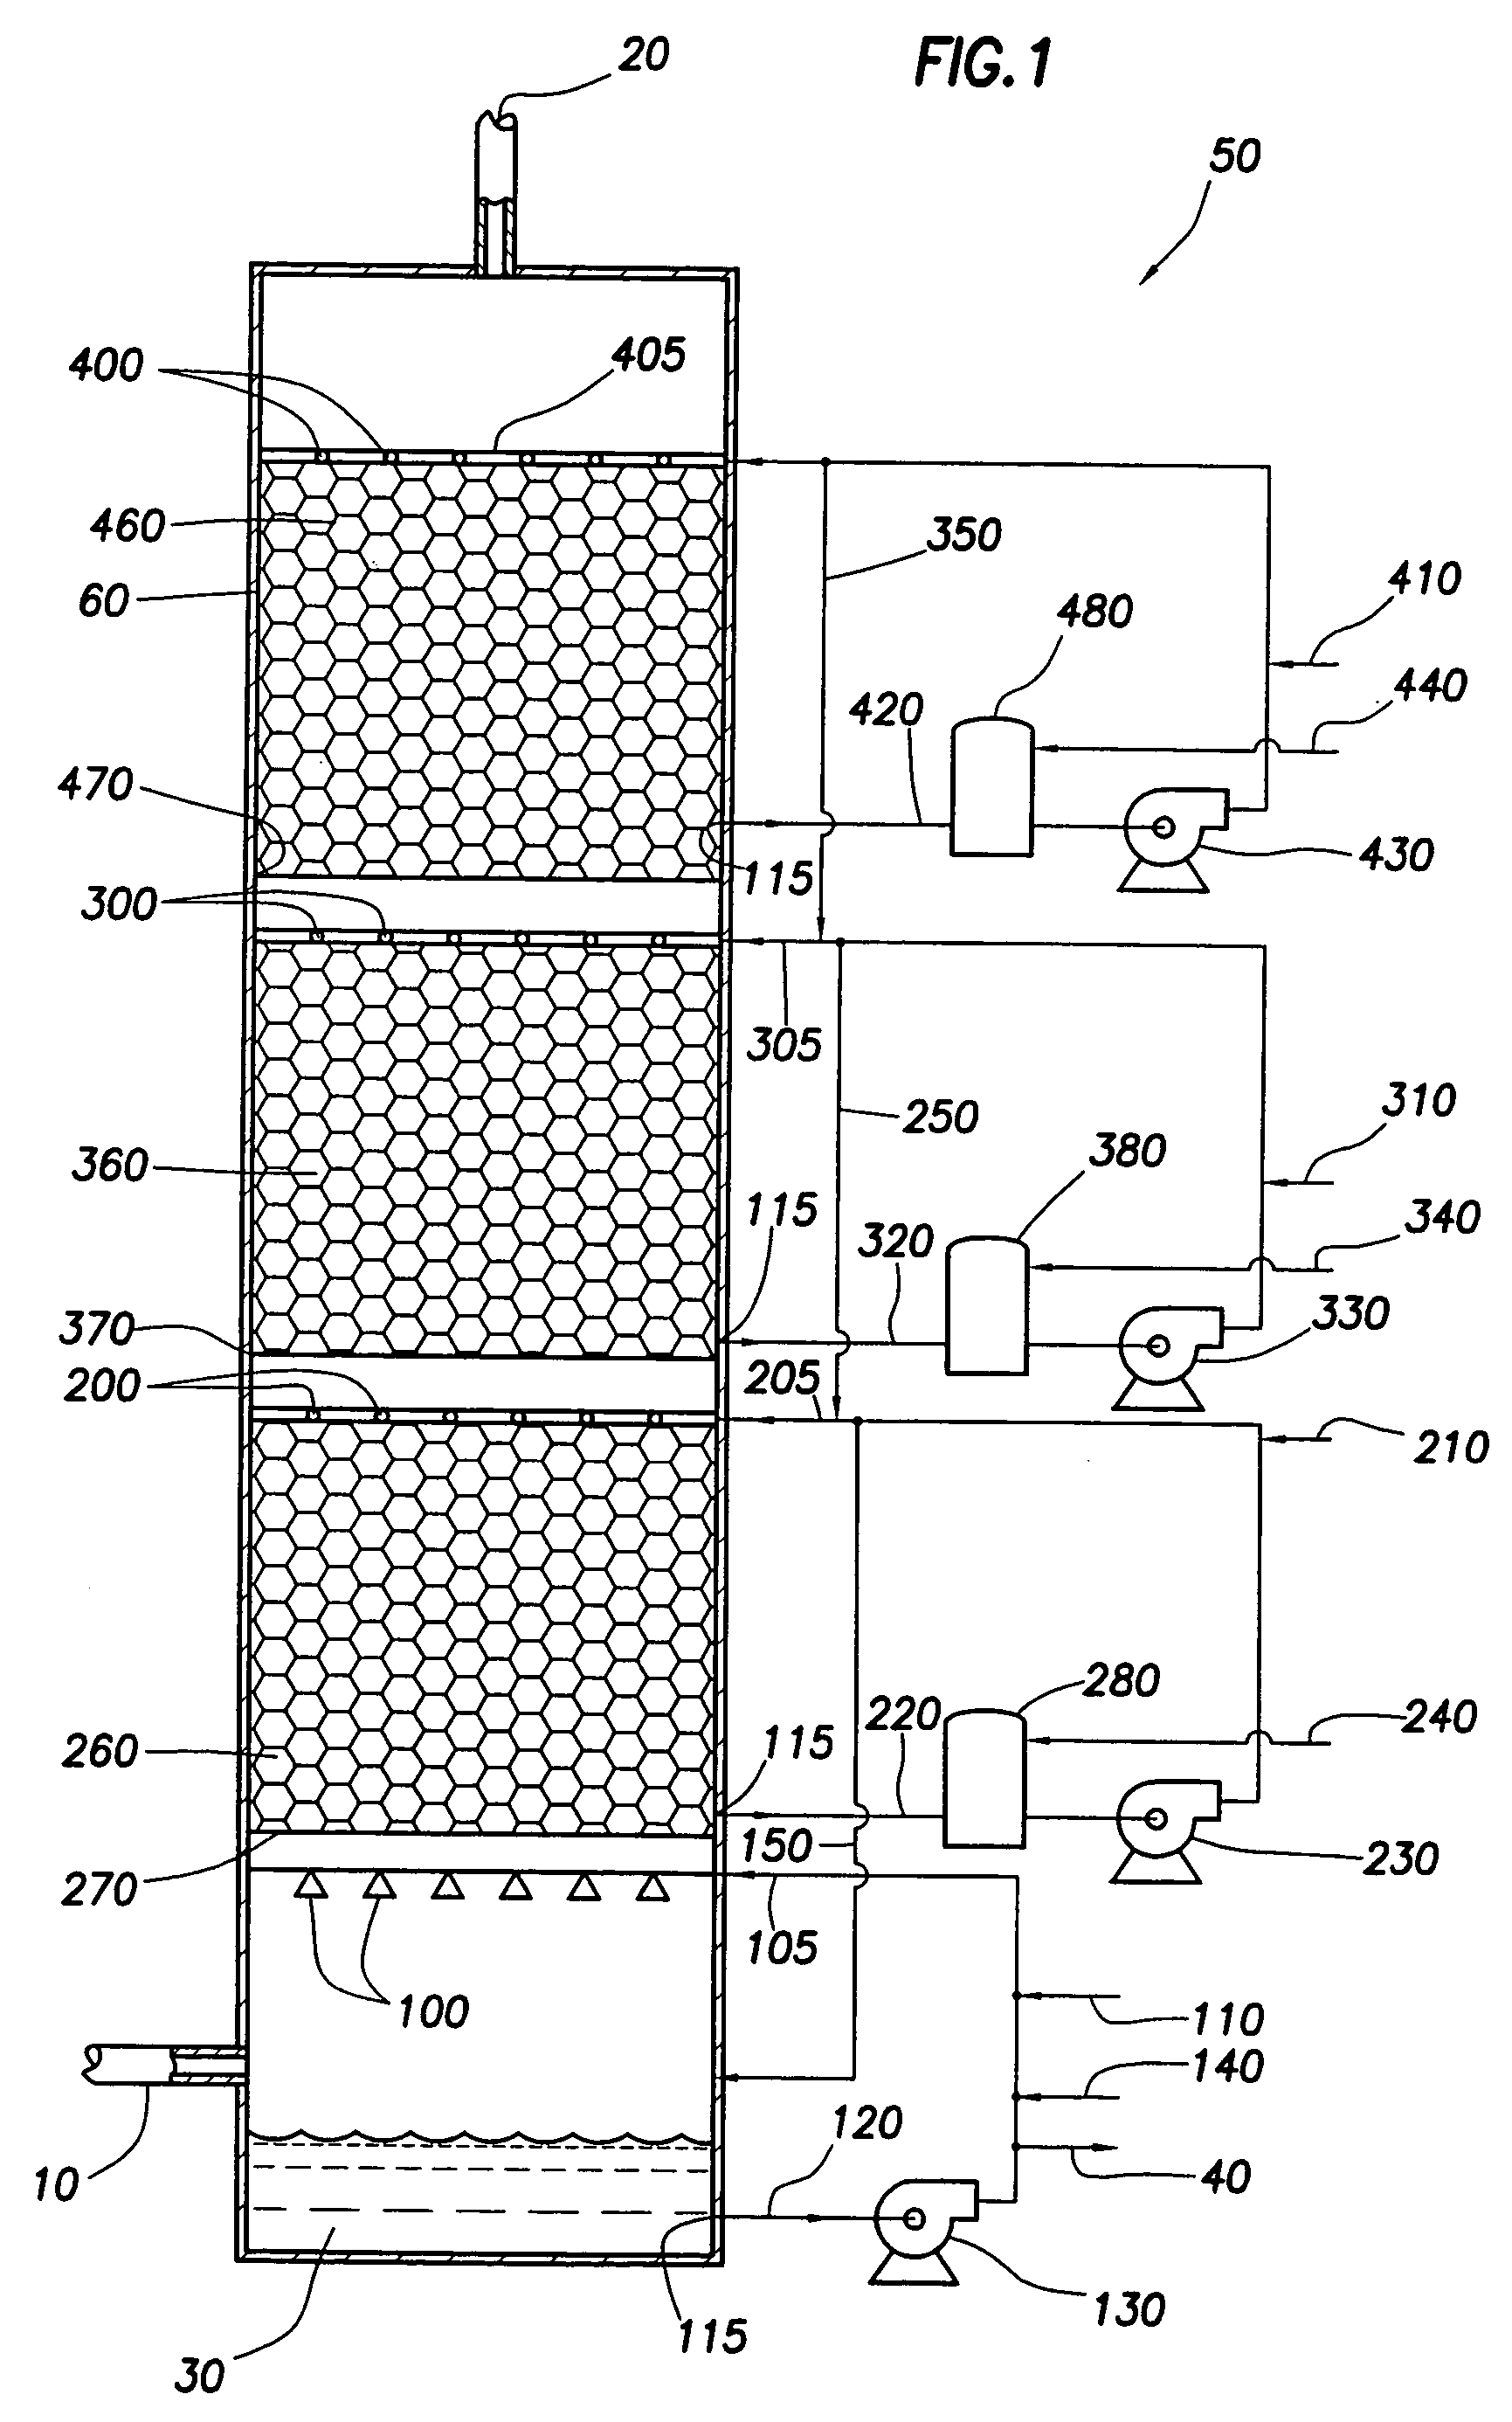 Process and apparatus for scrubbing sulfur dioxide from flue gas and conversion to fertilizer